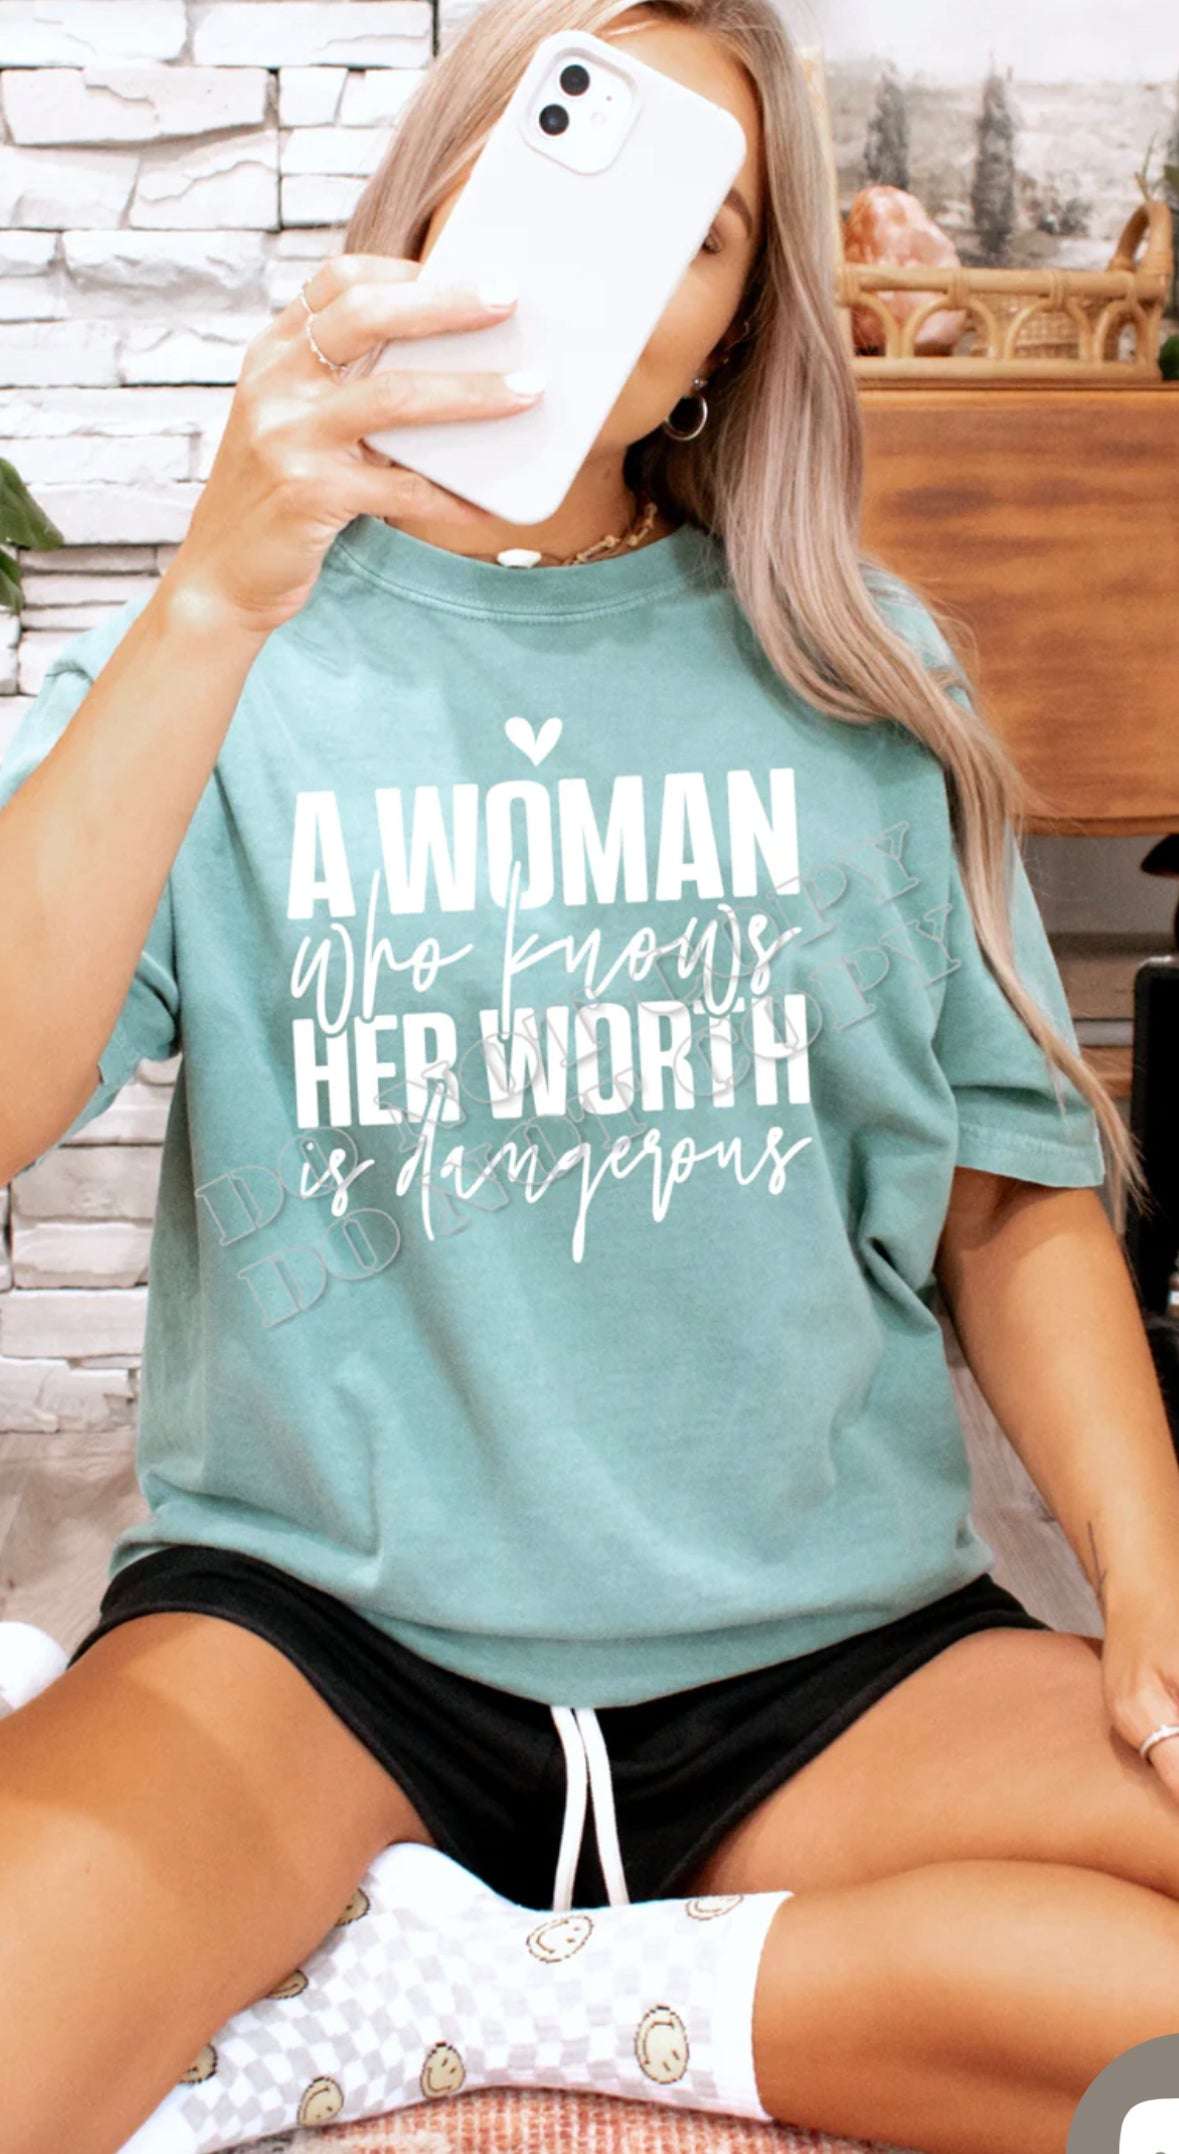 A woman Who Knows Her Worth is Dangerous T-Shirt Collection 22 Daisy Designs & Creations LLC